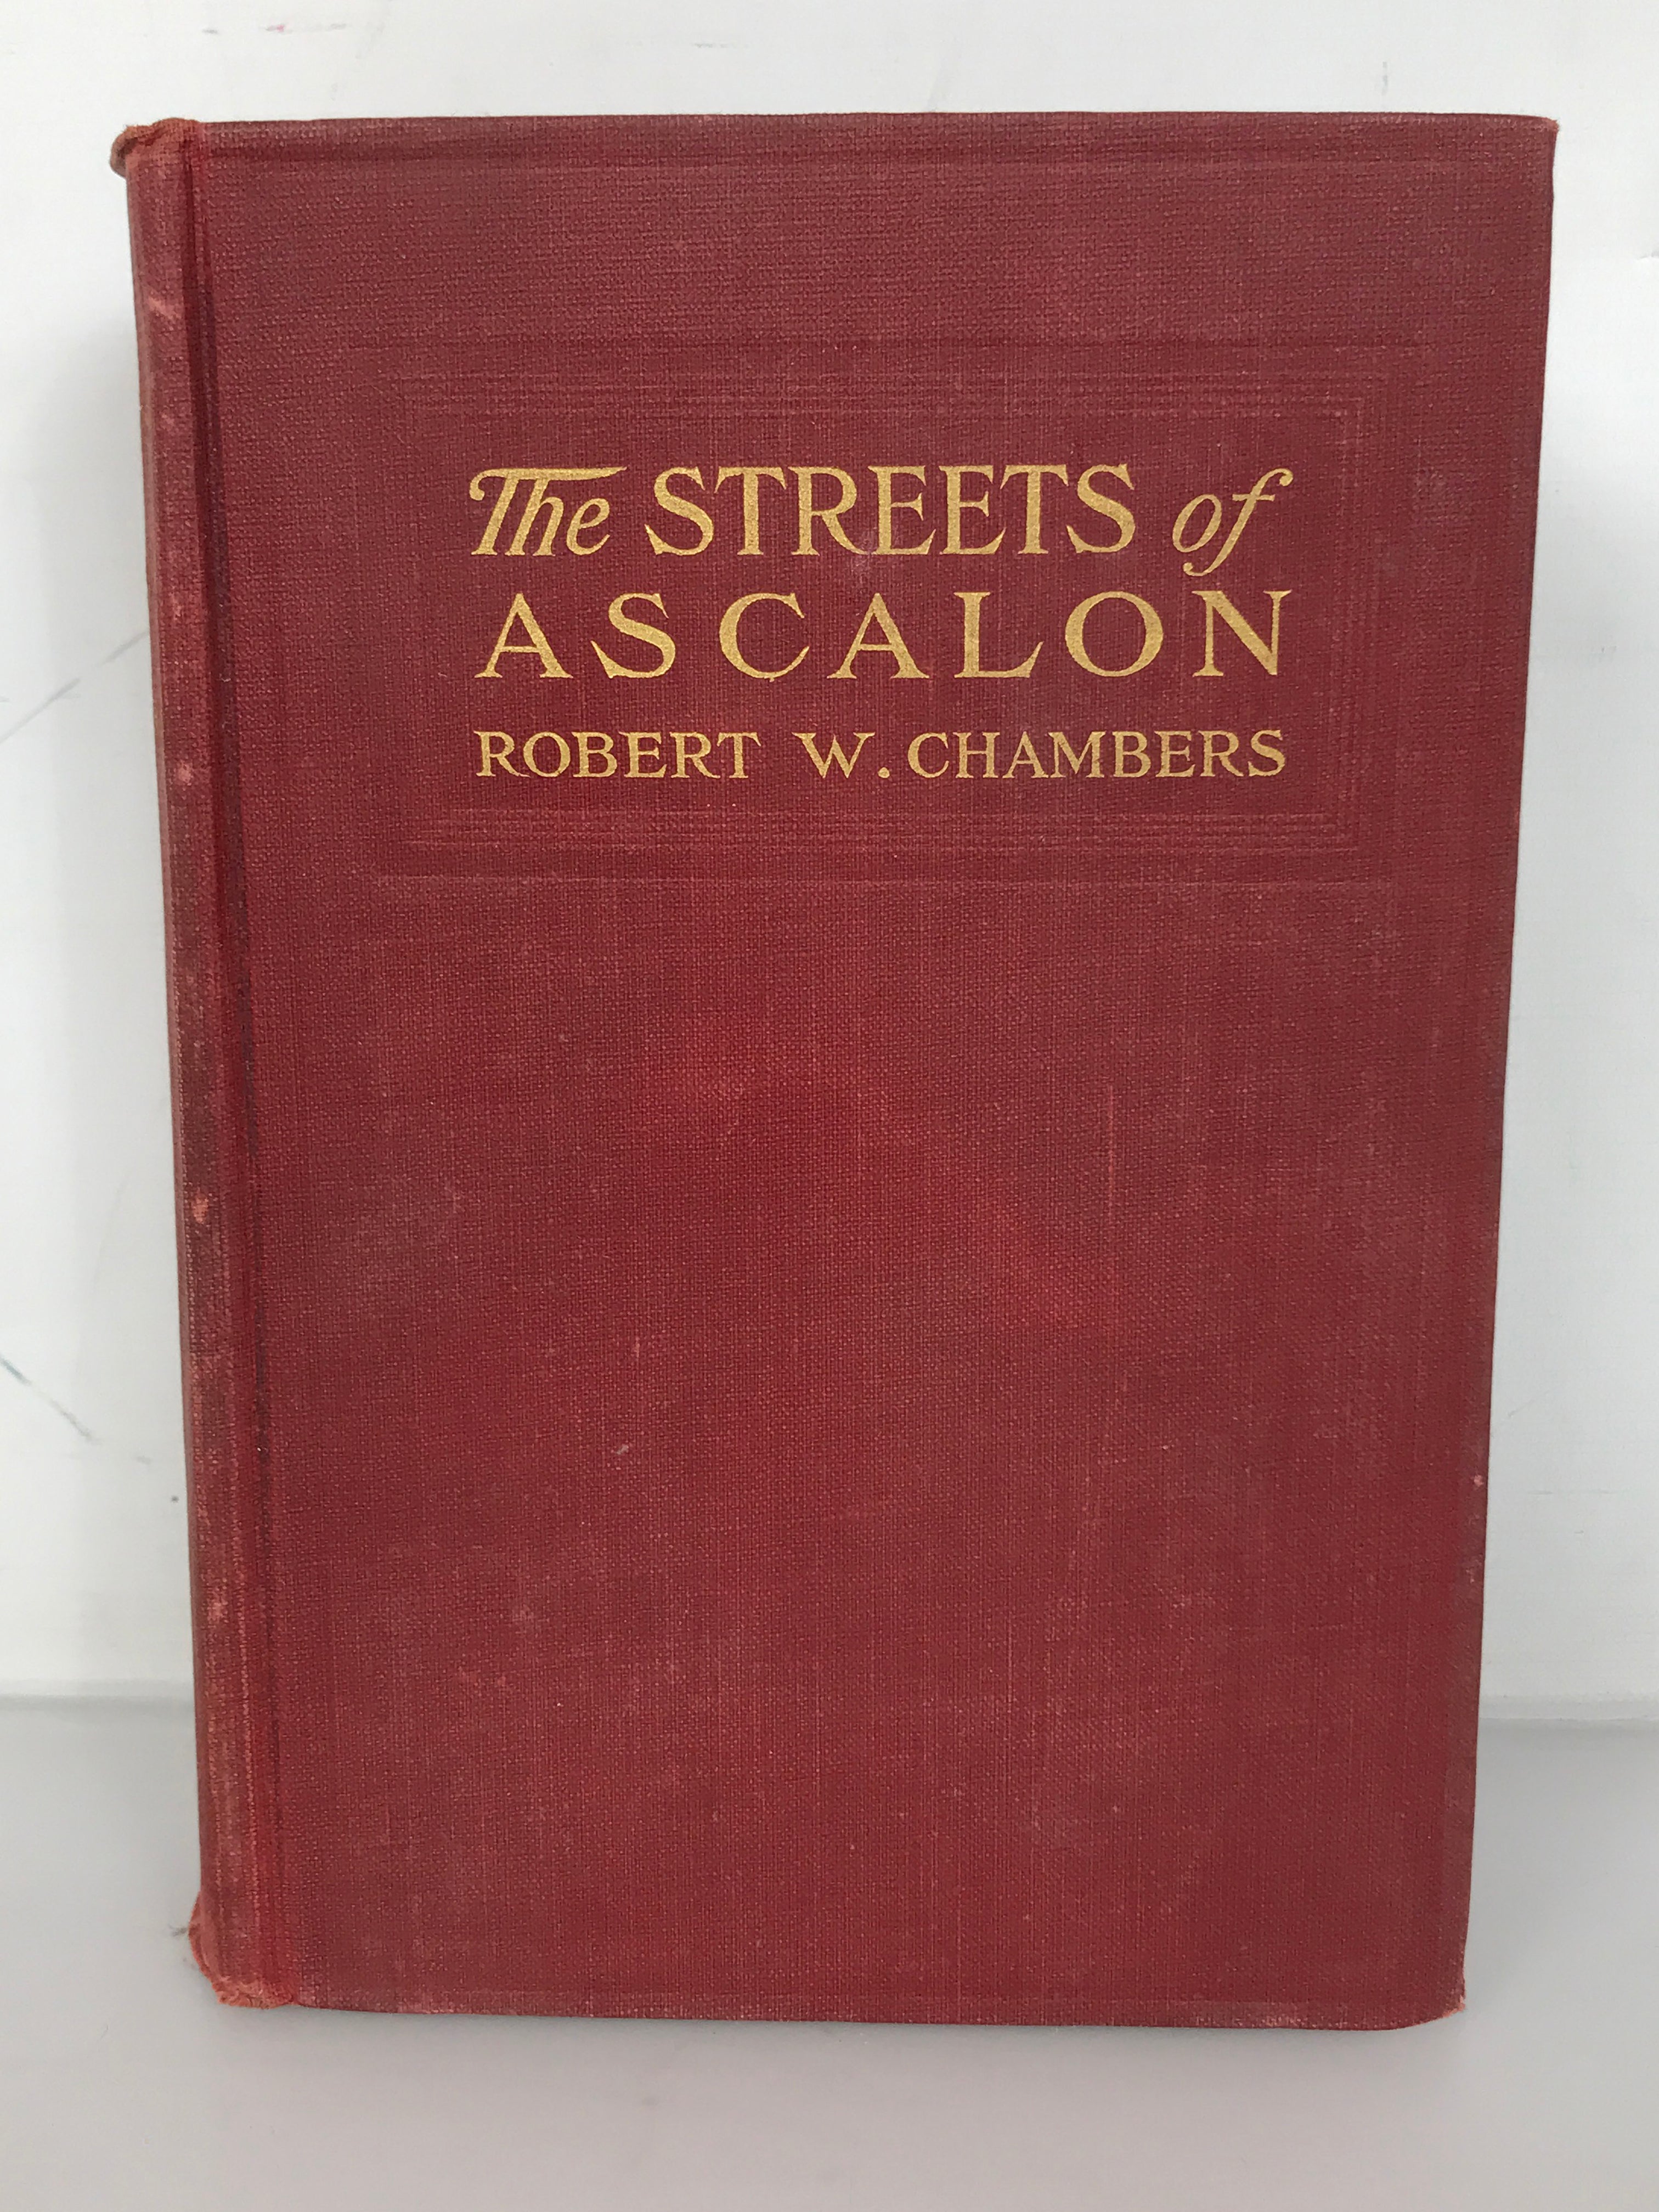 The Streets of Ascalon by Robert W. Chambers First Edition 1912 HC